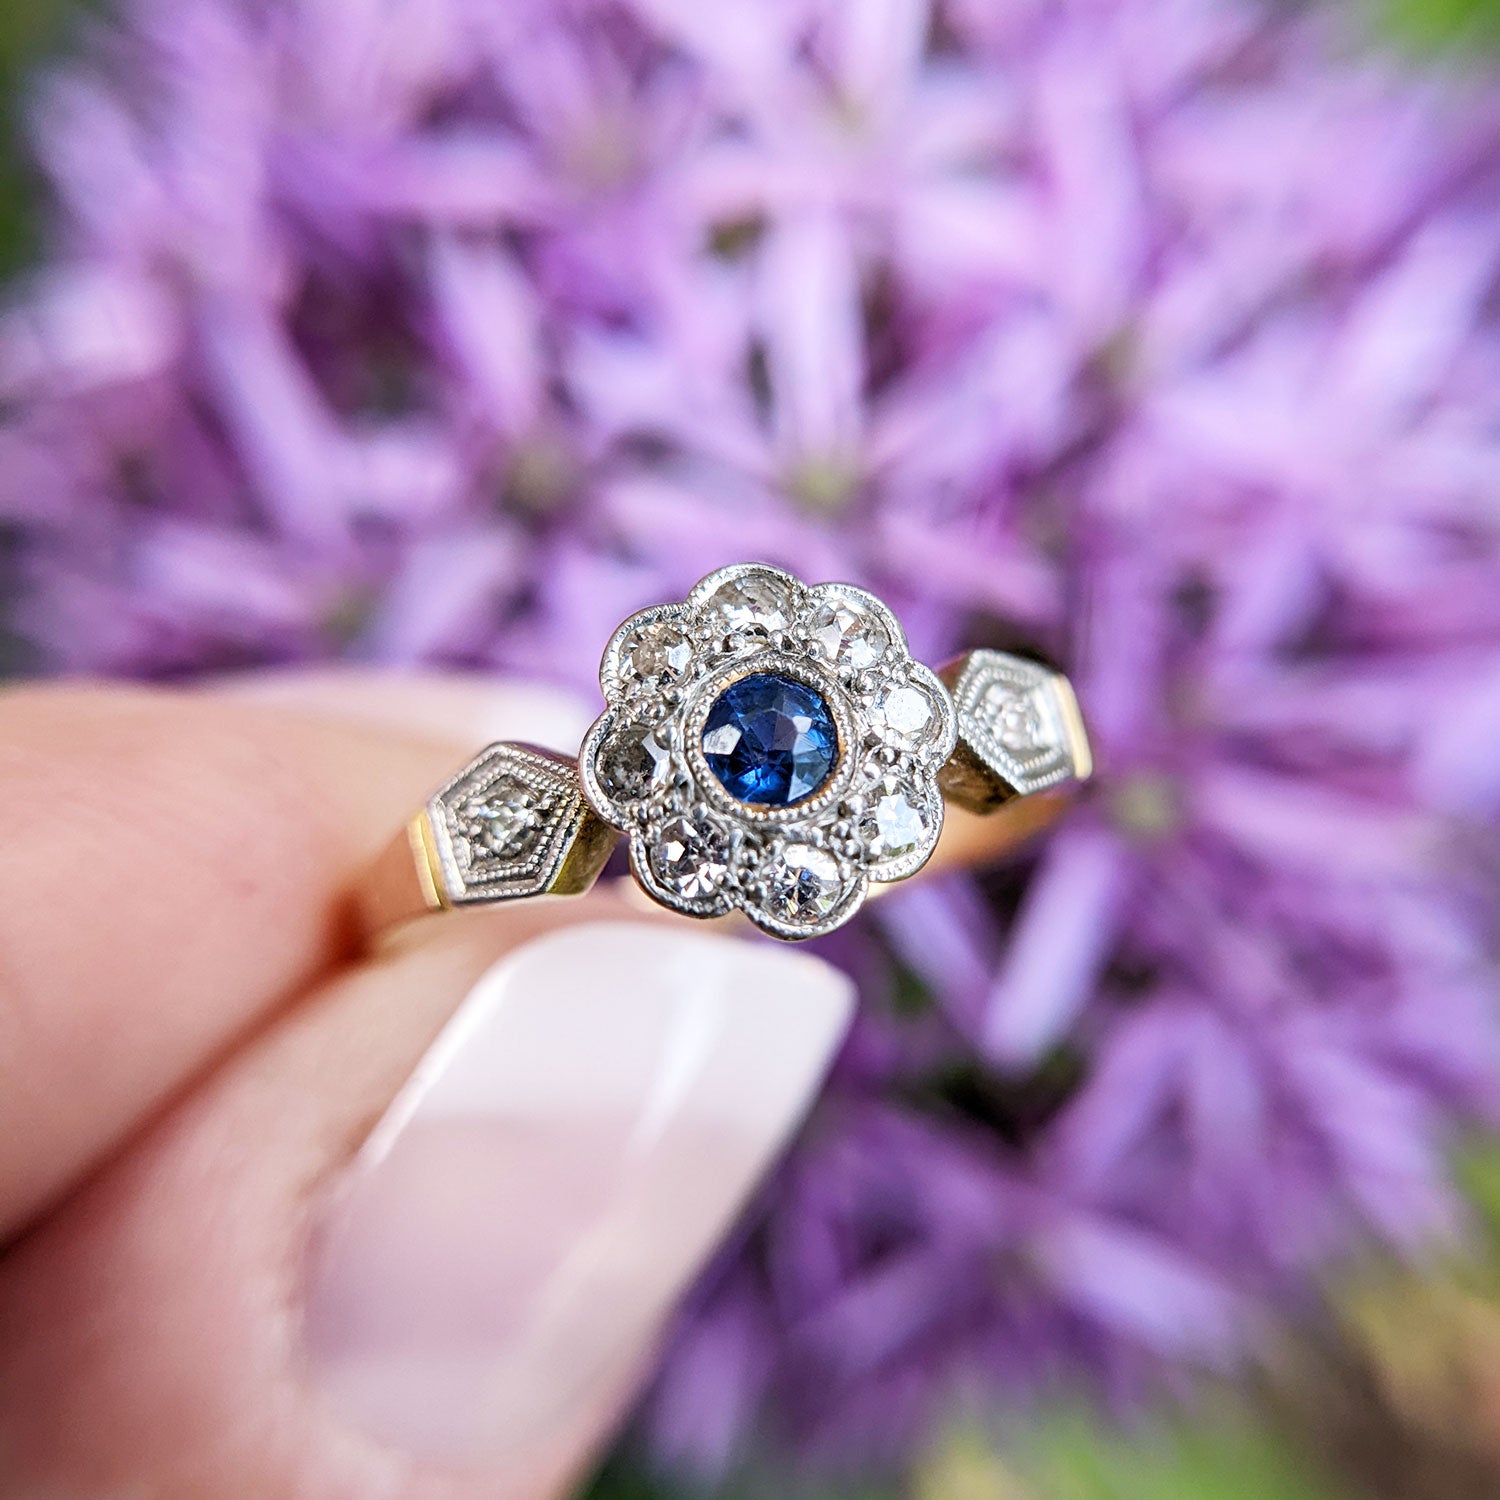 Antique 1920s Sapphire & Diamond Cluster Ring for sale in Co. Kildare for  €3,950 on DoneDeal